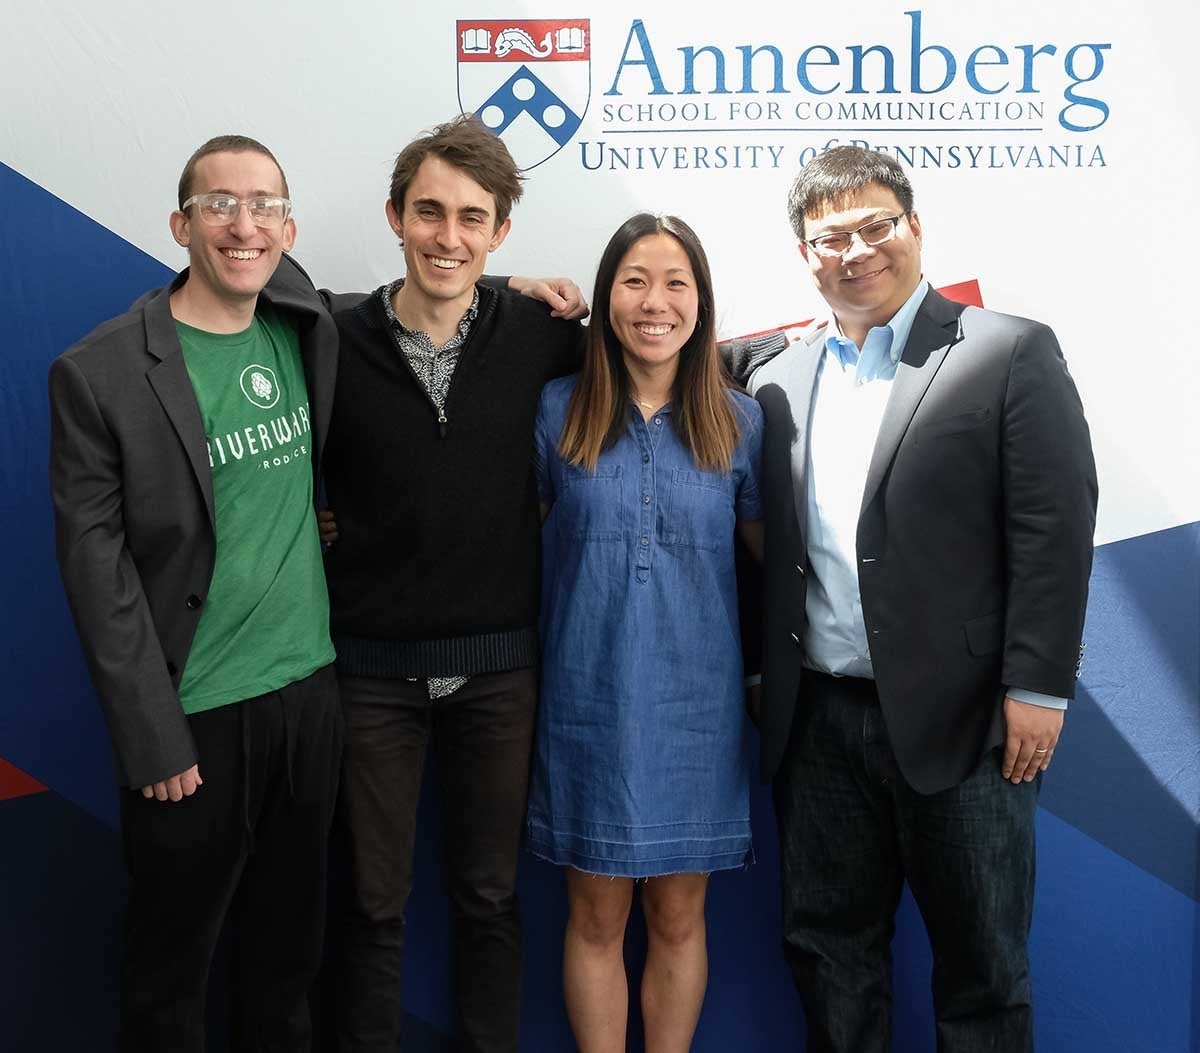 Joshua Becker, Guilbeault, Angela Won, and Sijia Yang pose for a photo at the Annenberg School Graduate Symposium